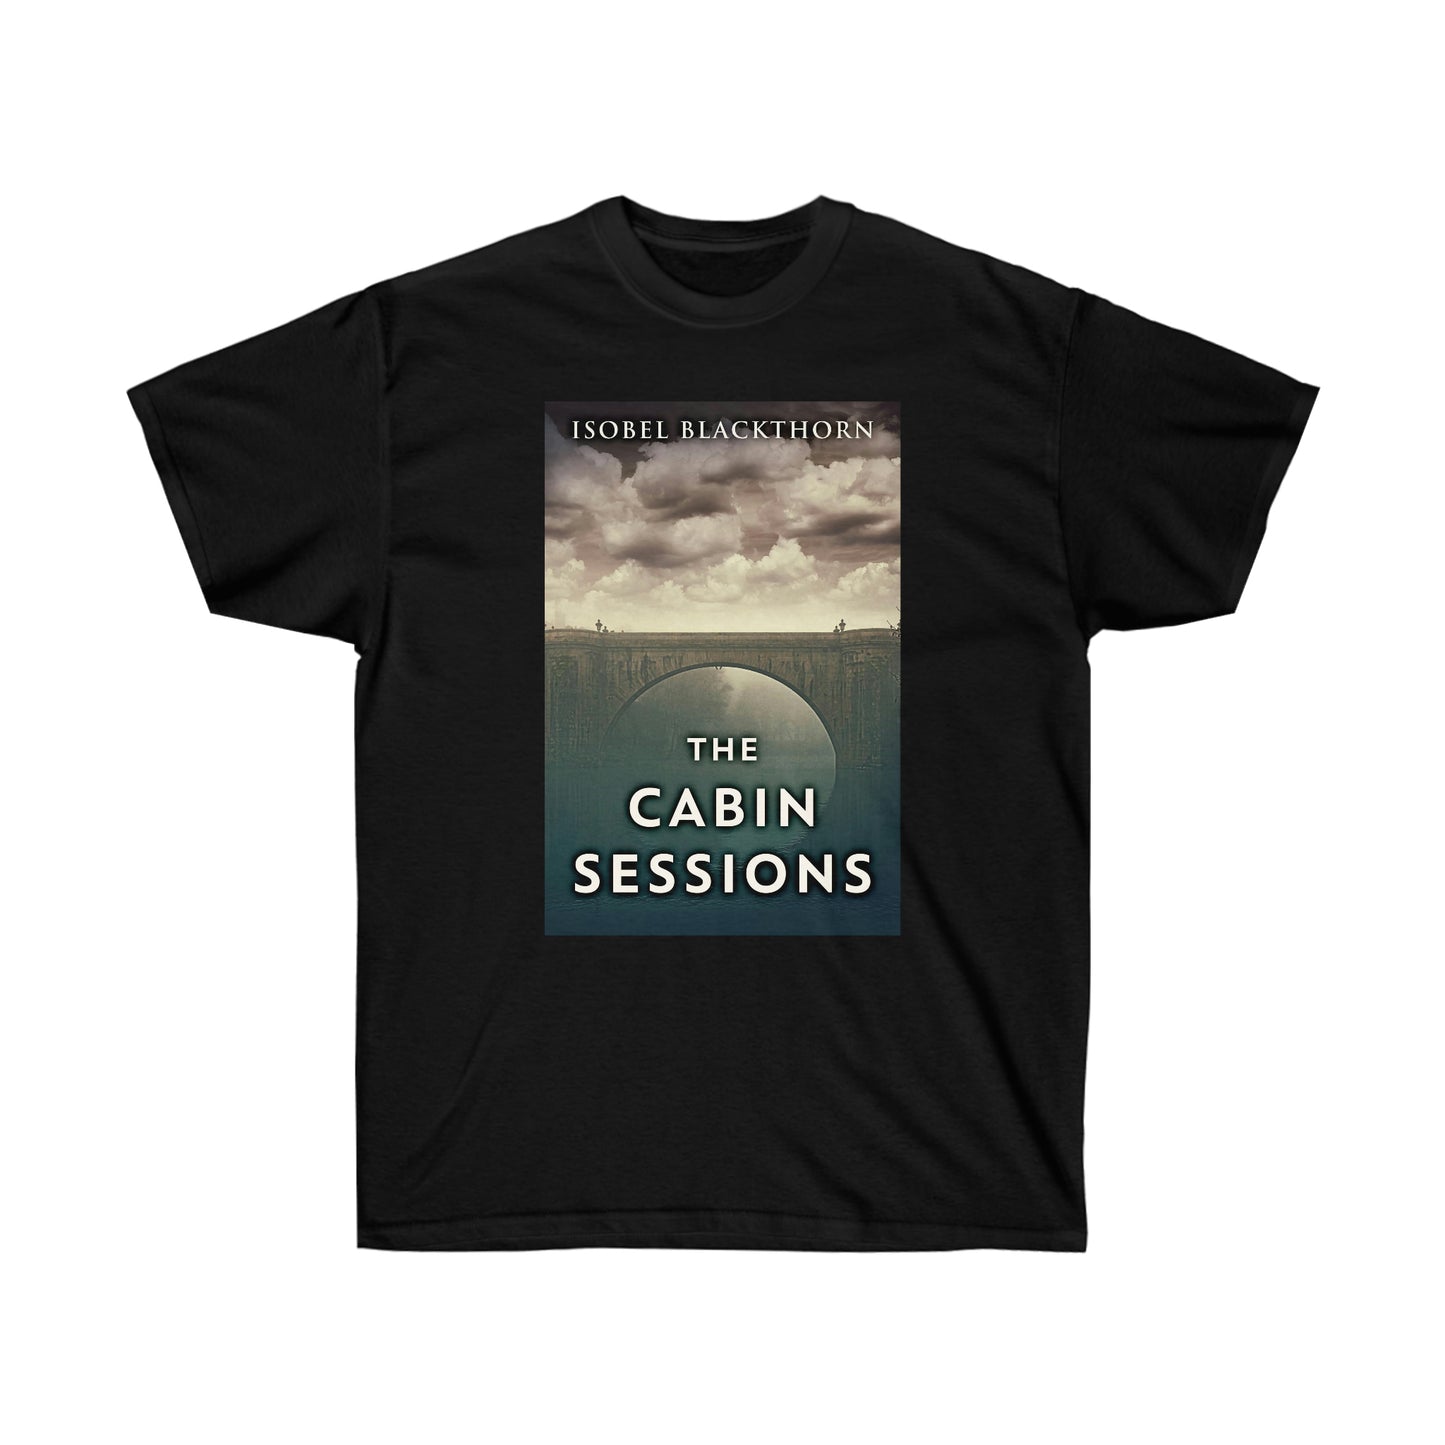 The Cabin Sessions - Unisex T-Shirt